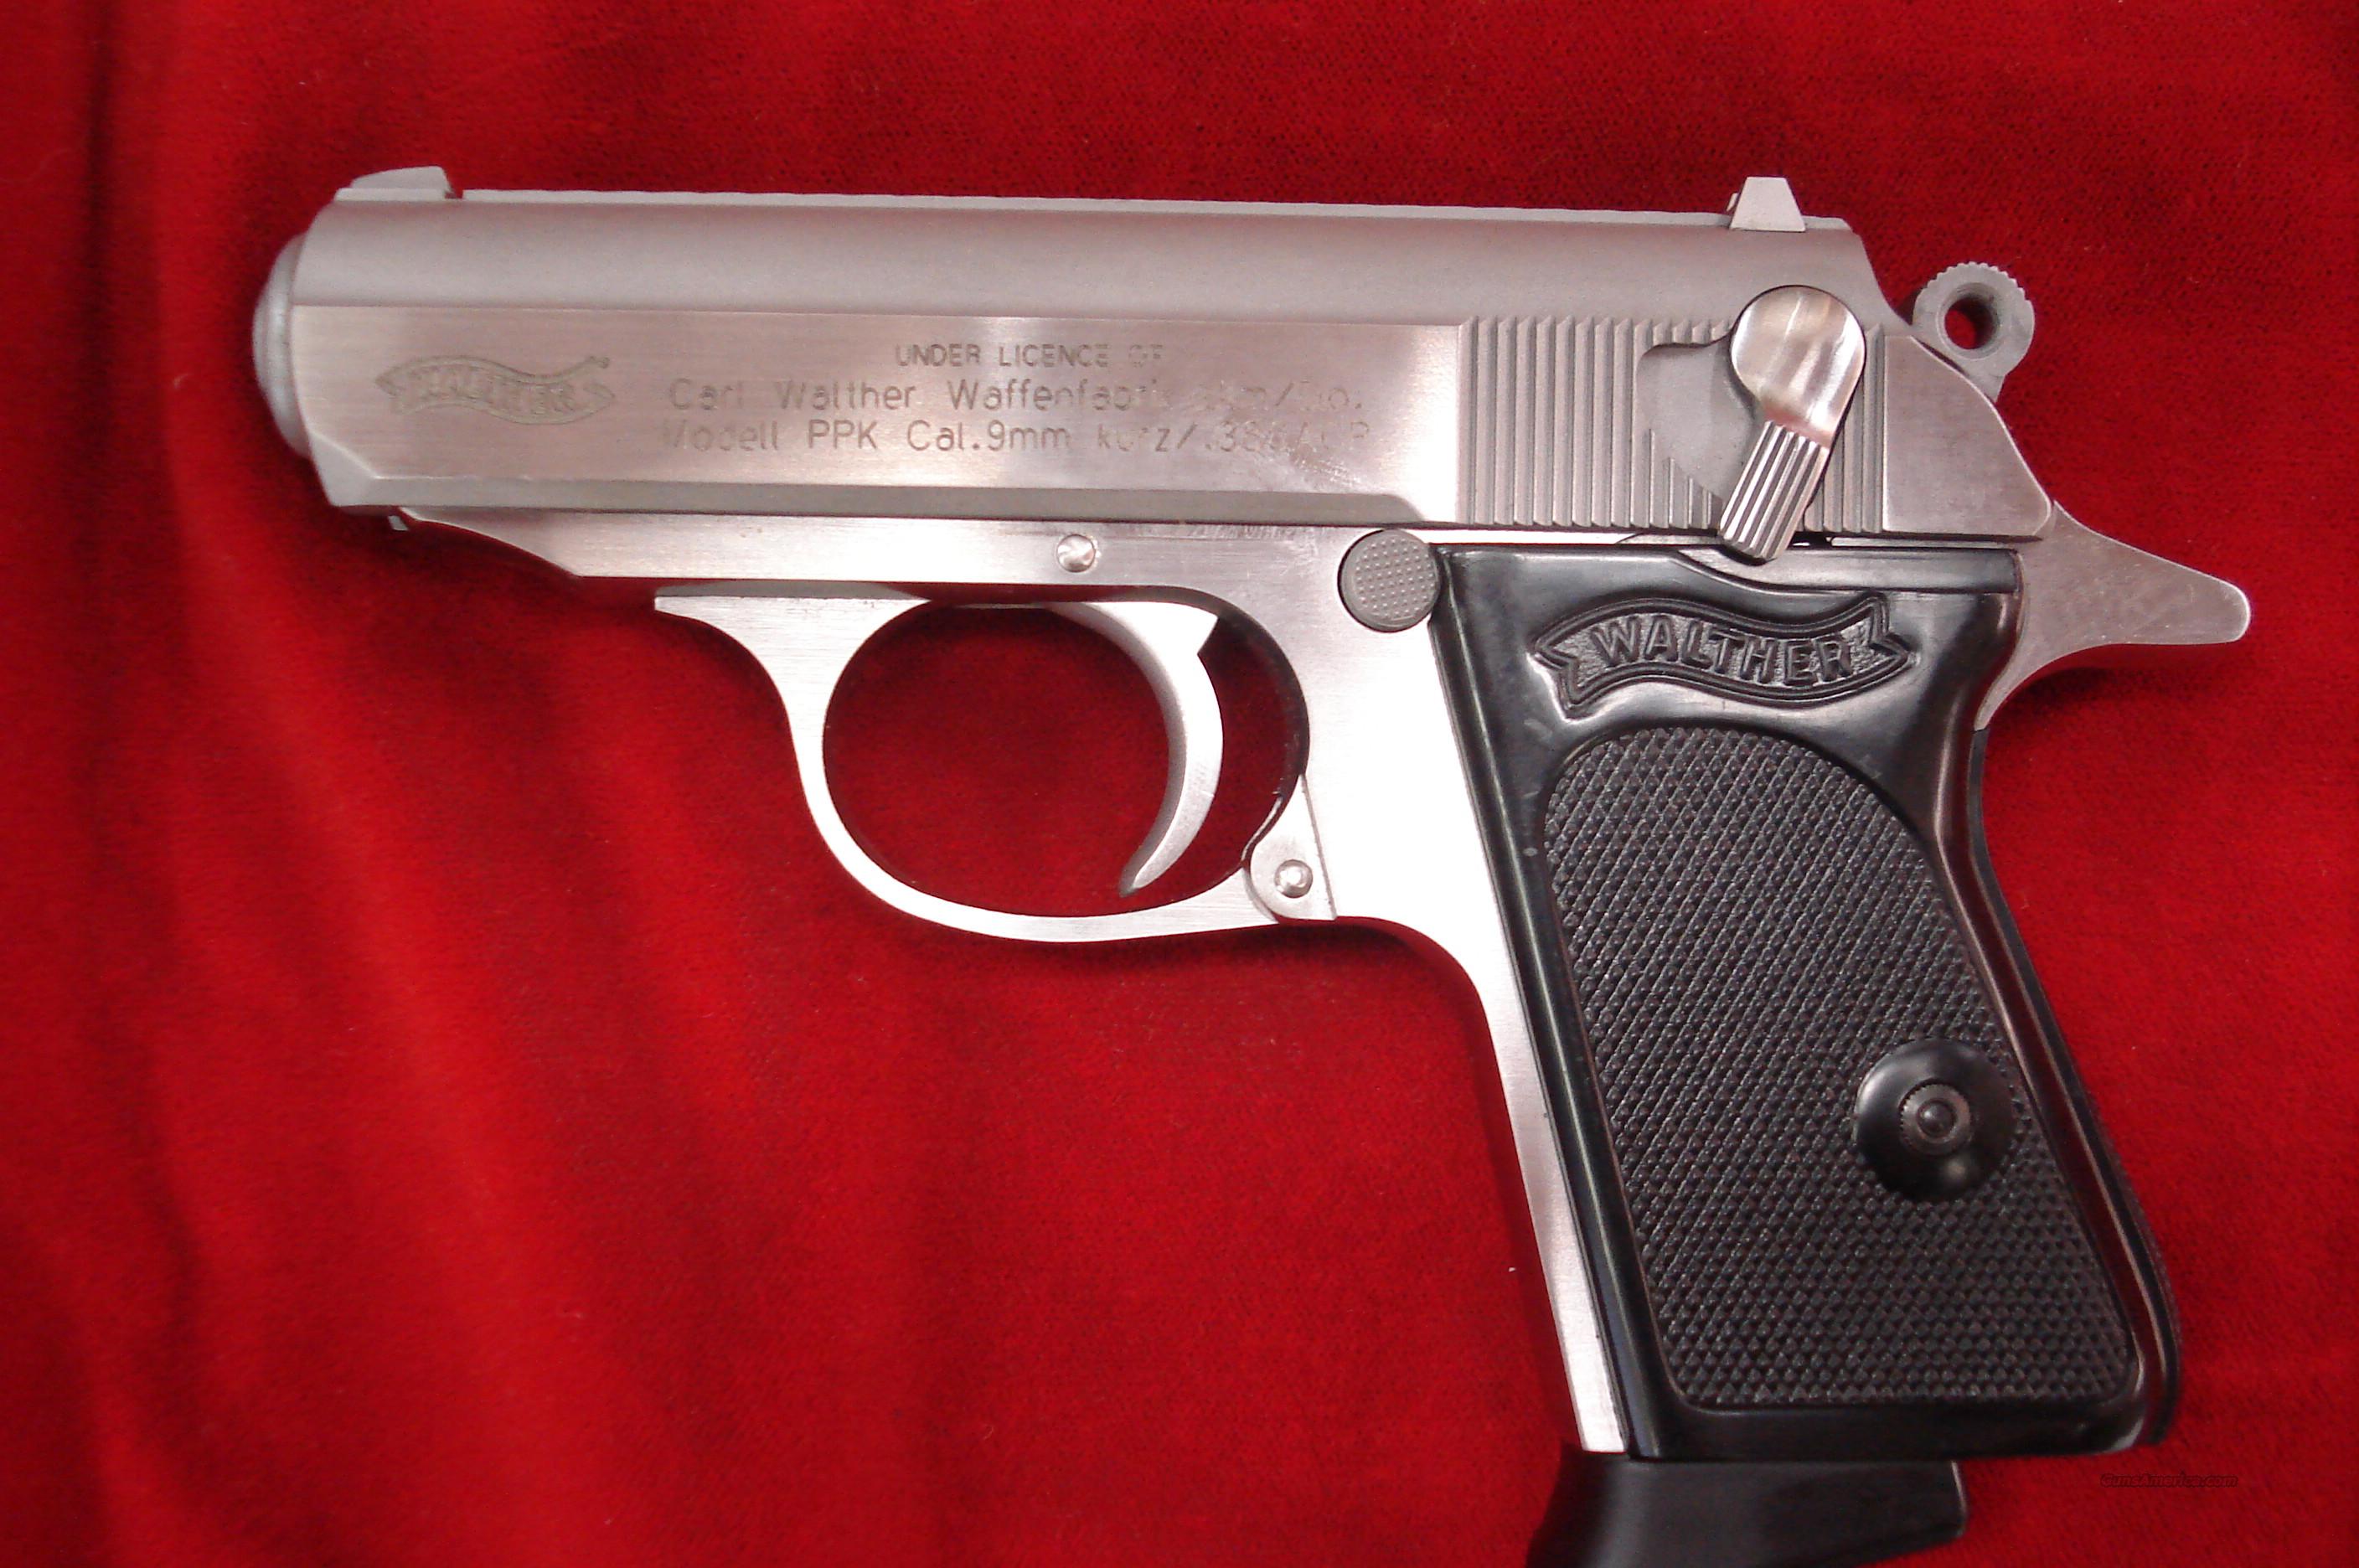 Walther ppk stainless 380 CAL. 